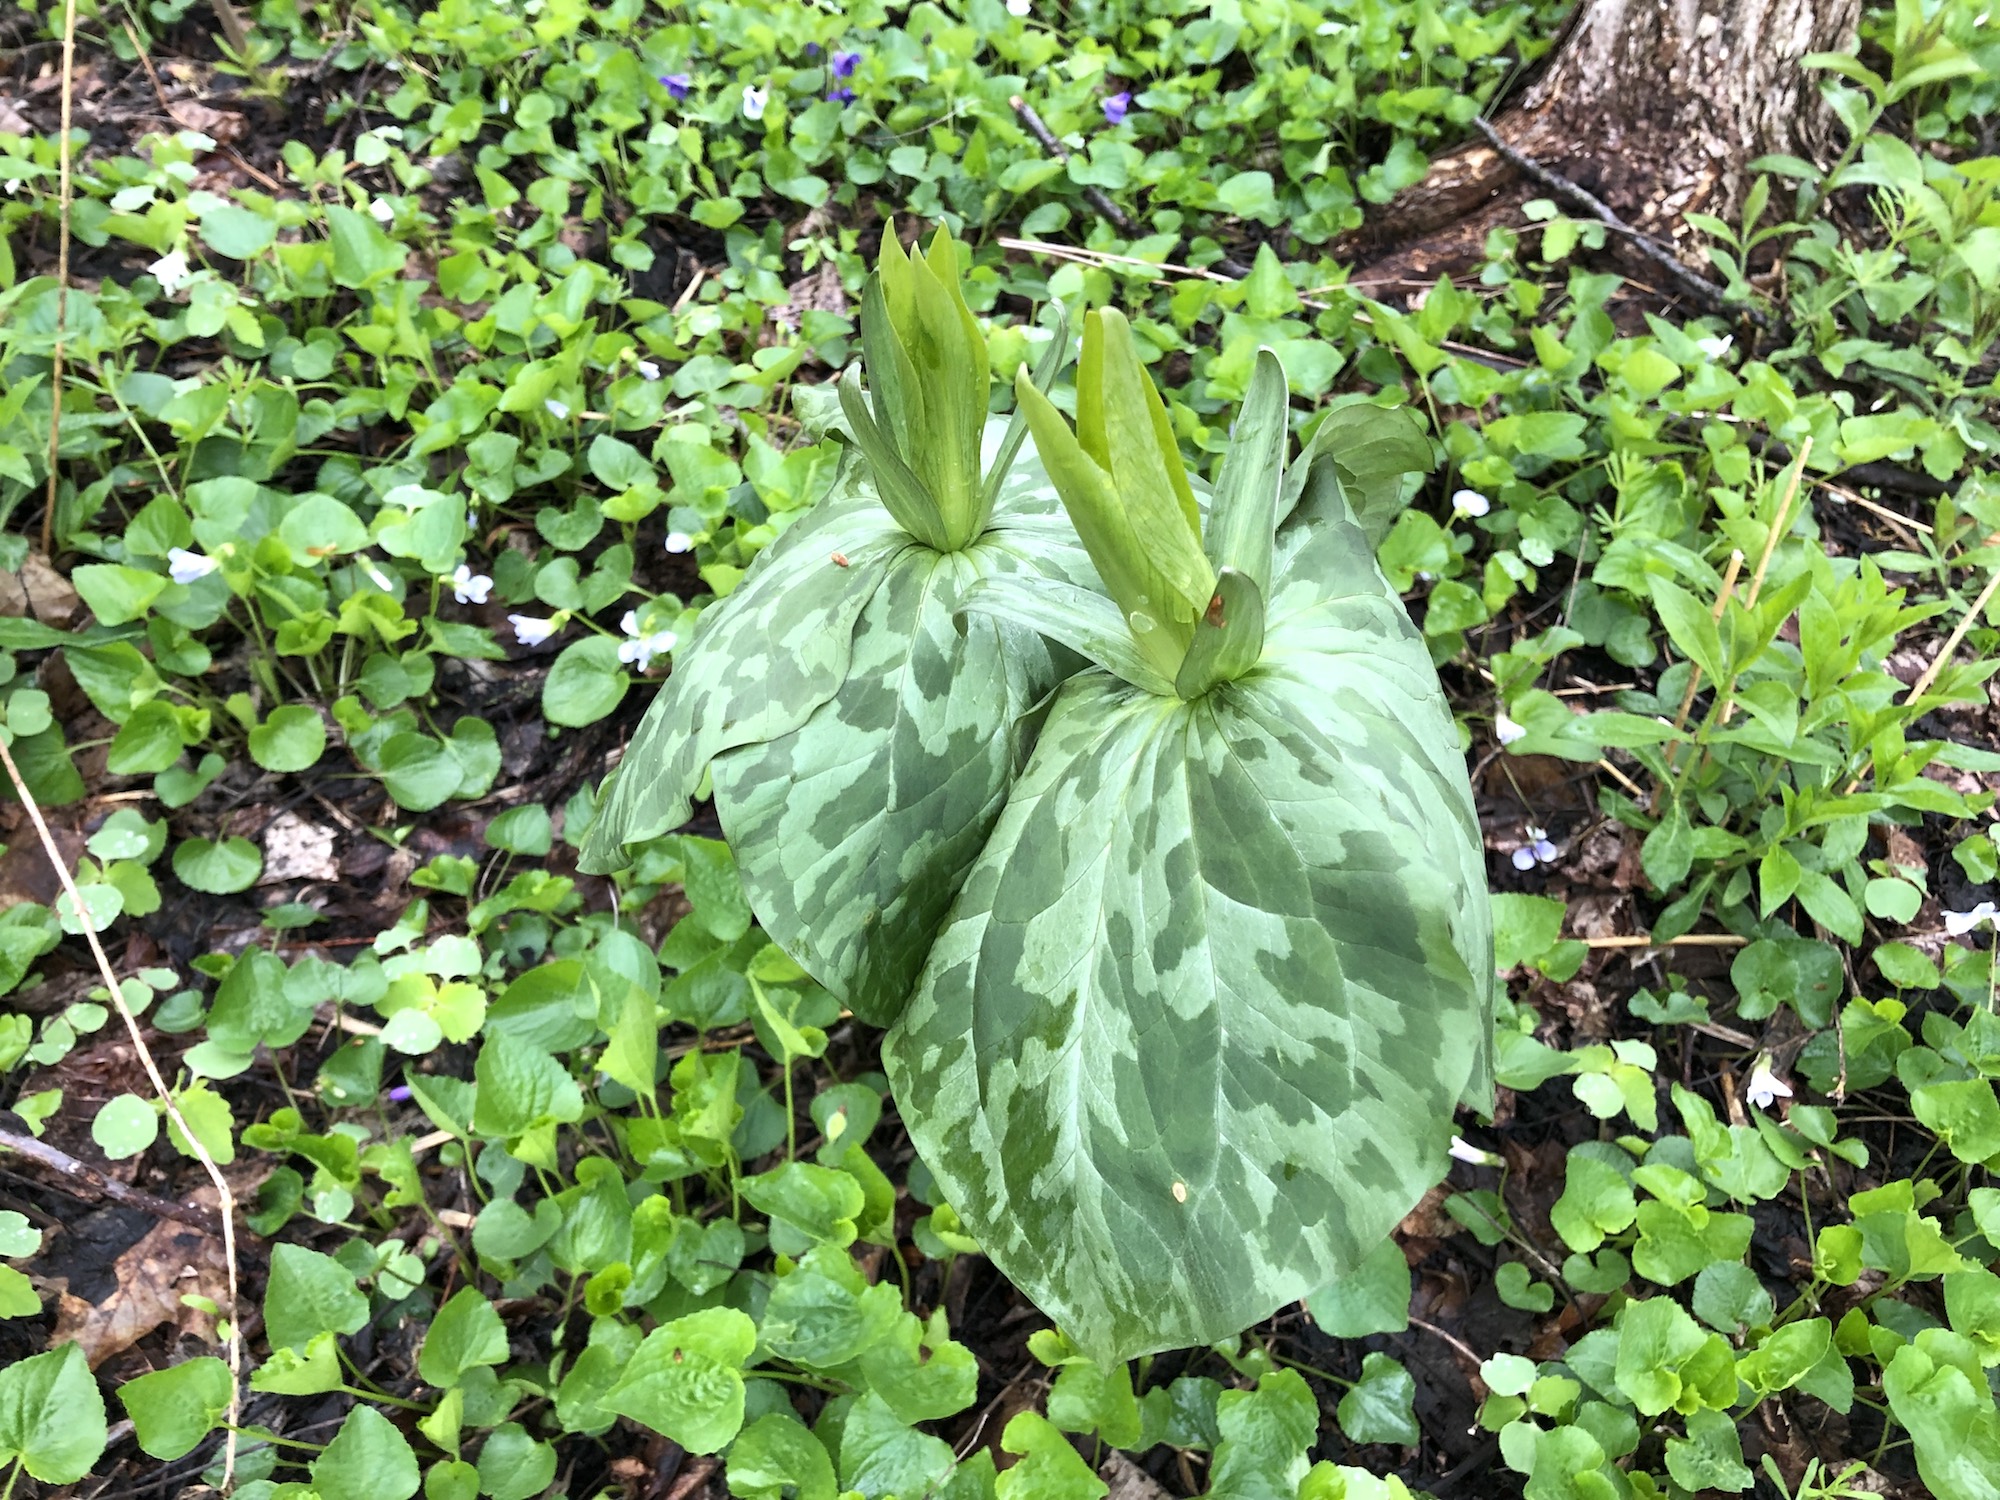 Yellow Trillium off of bike path between Marion Dunn and Duck Pond on April 30, 2019.